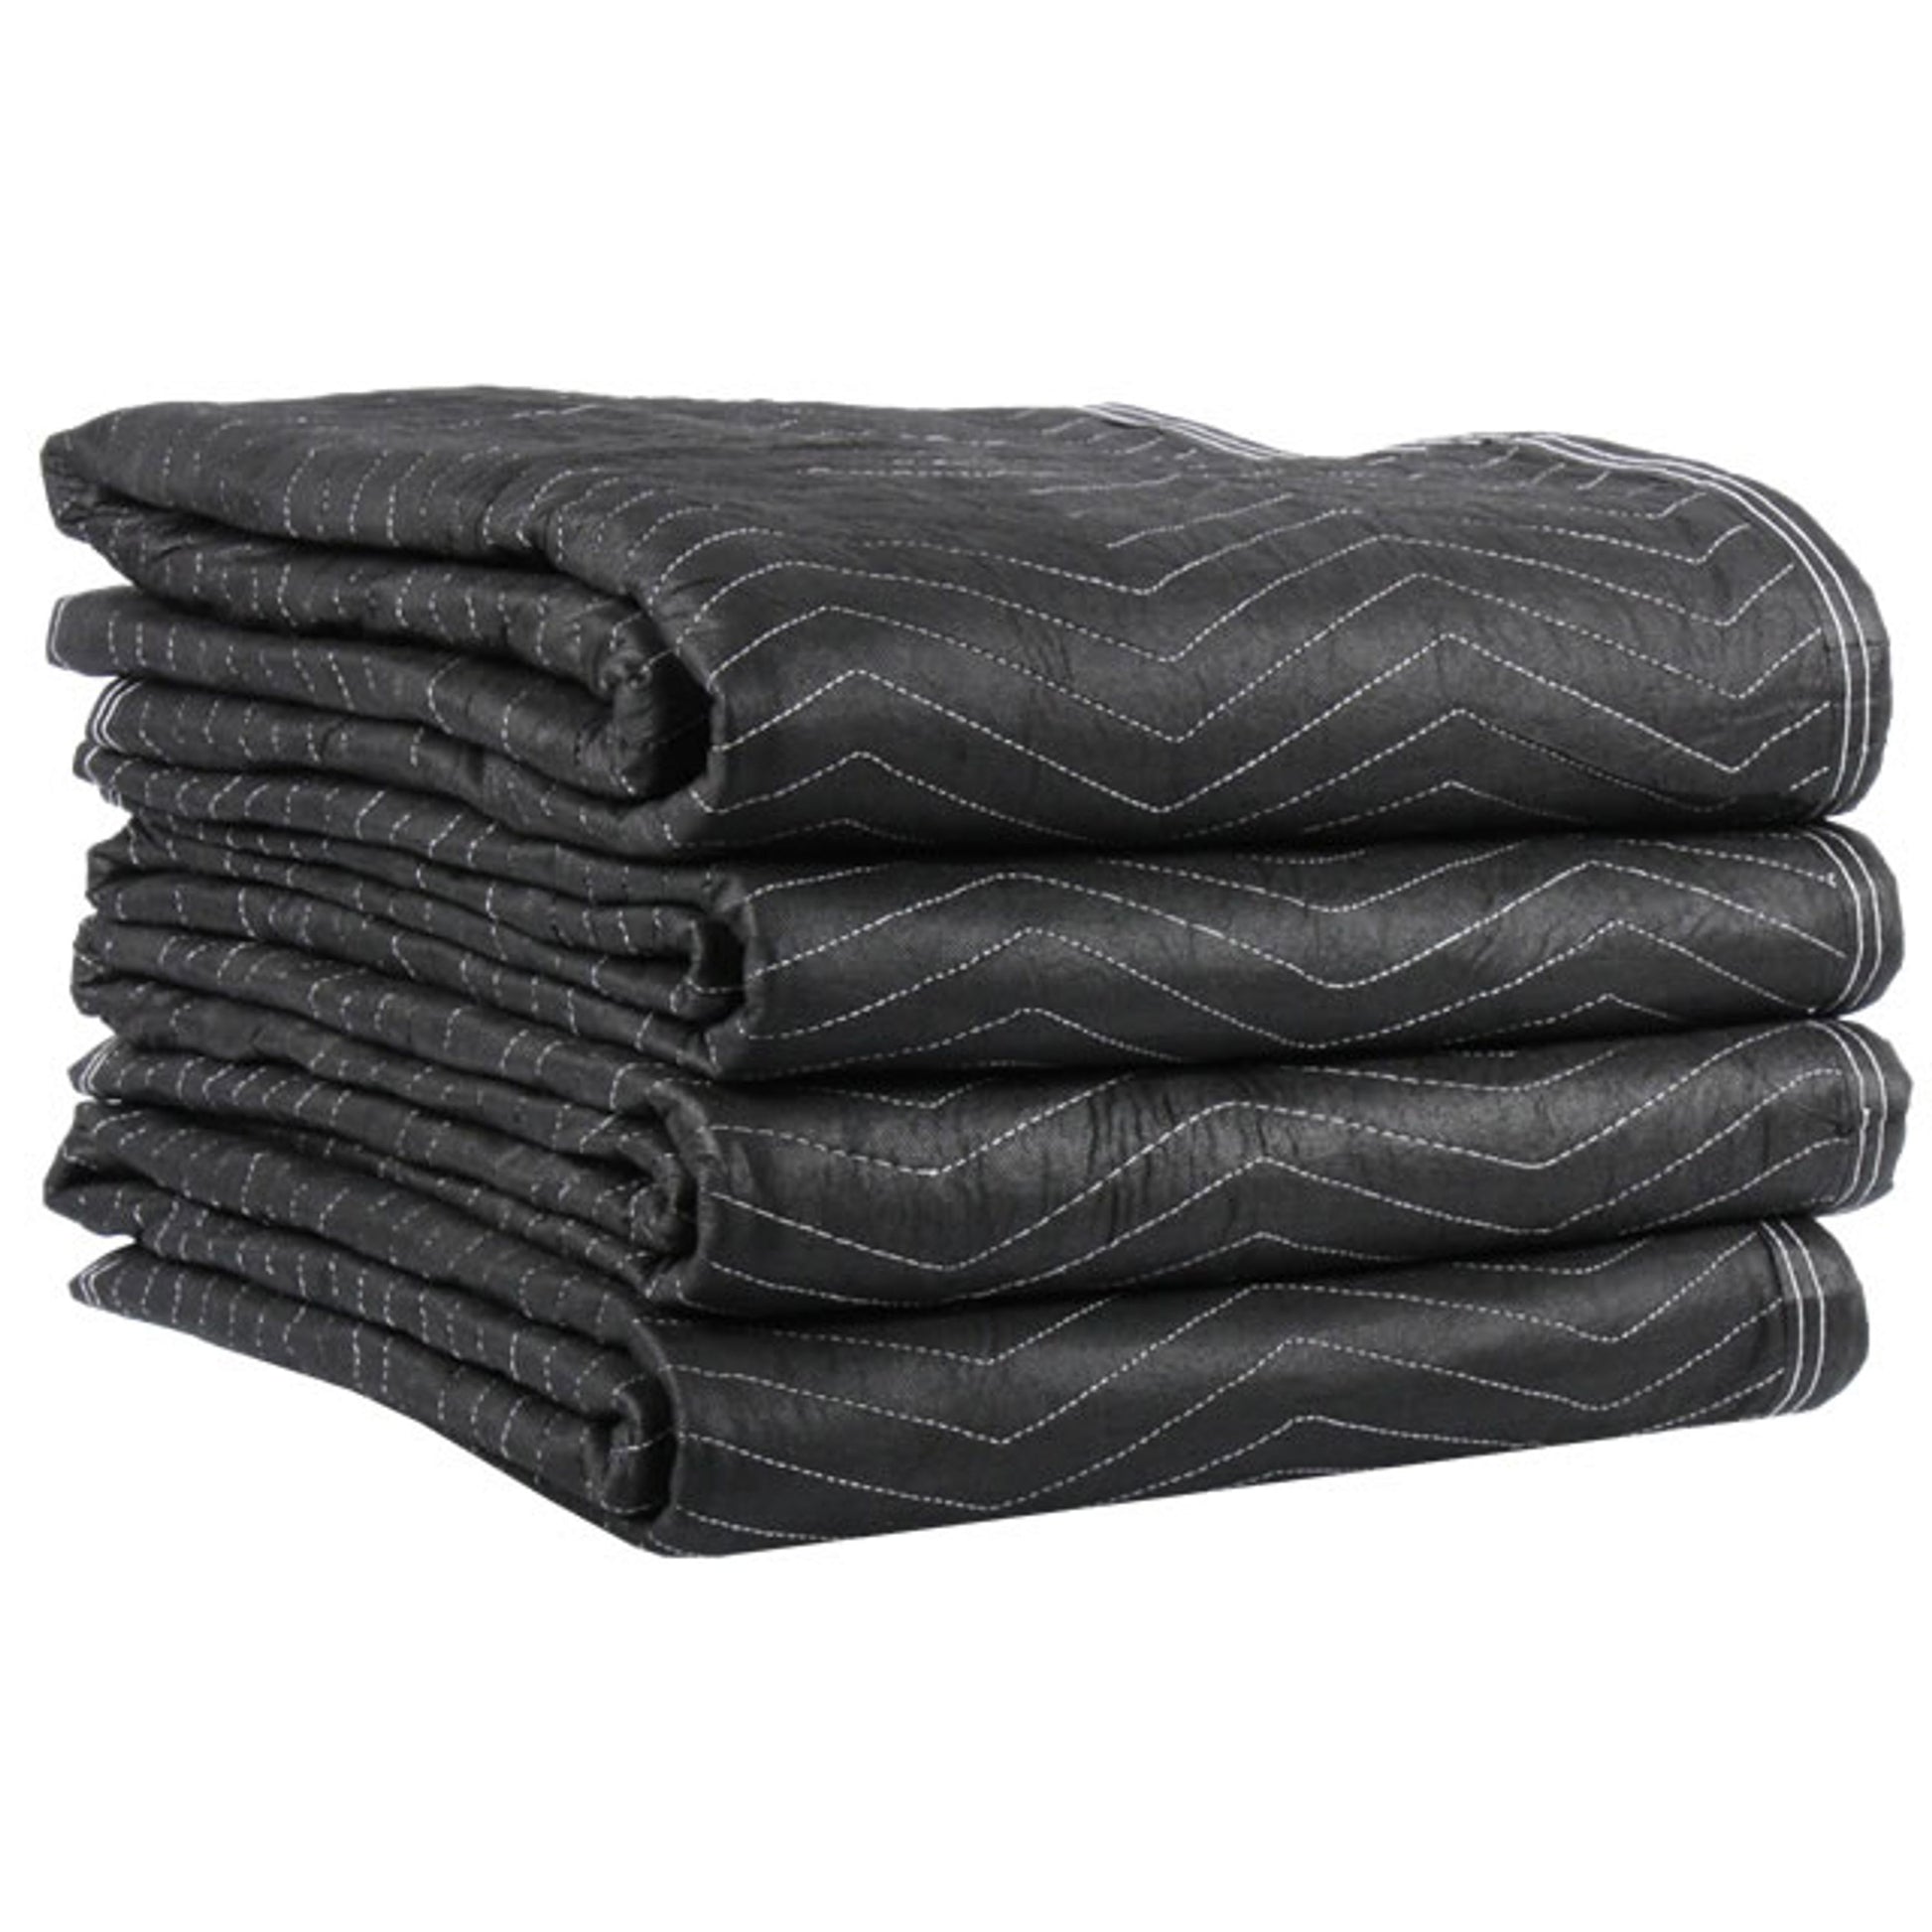 Moving Blankets- Econo Deluxe 4-Pack image 1 of 11